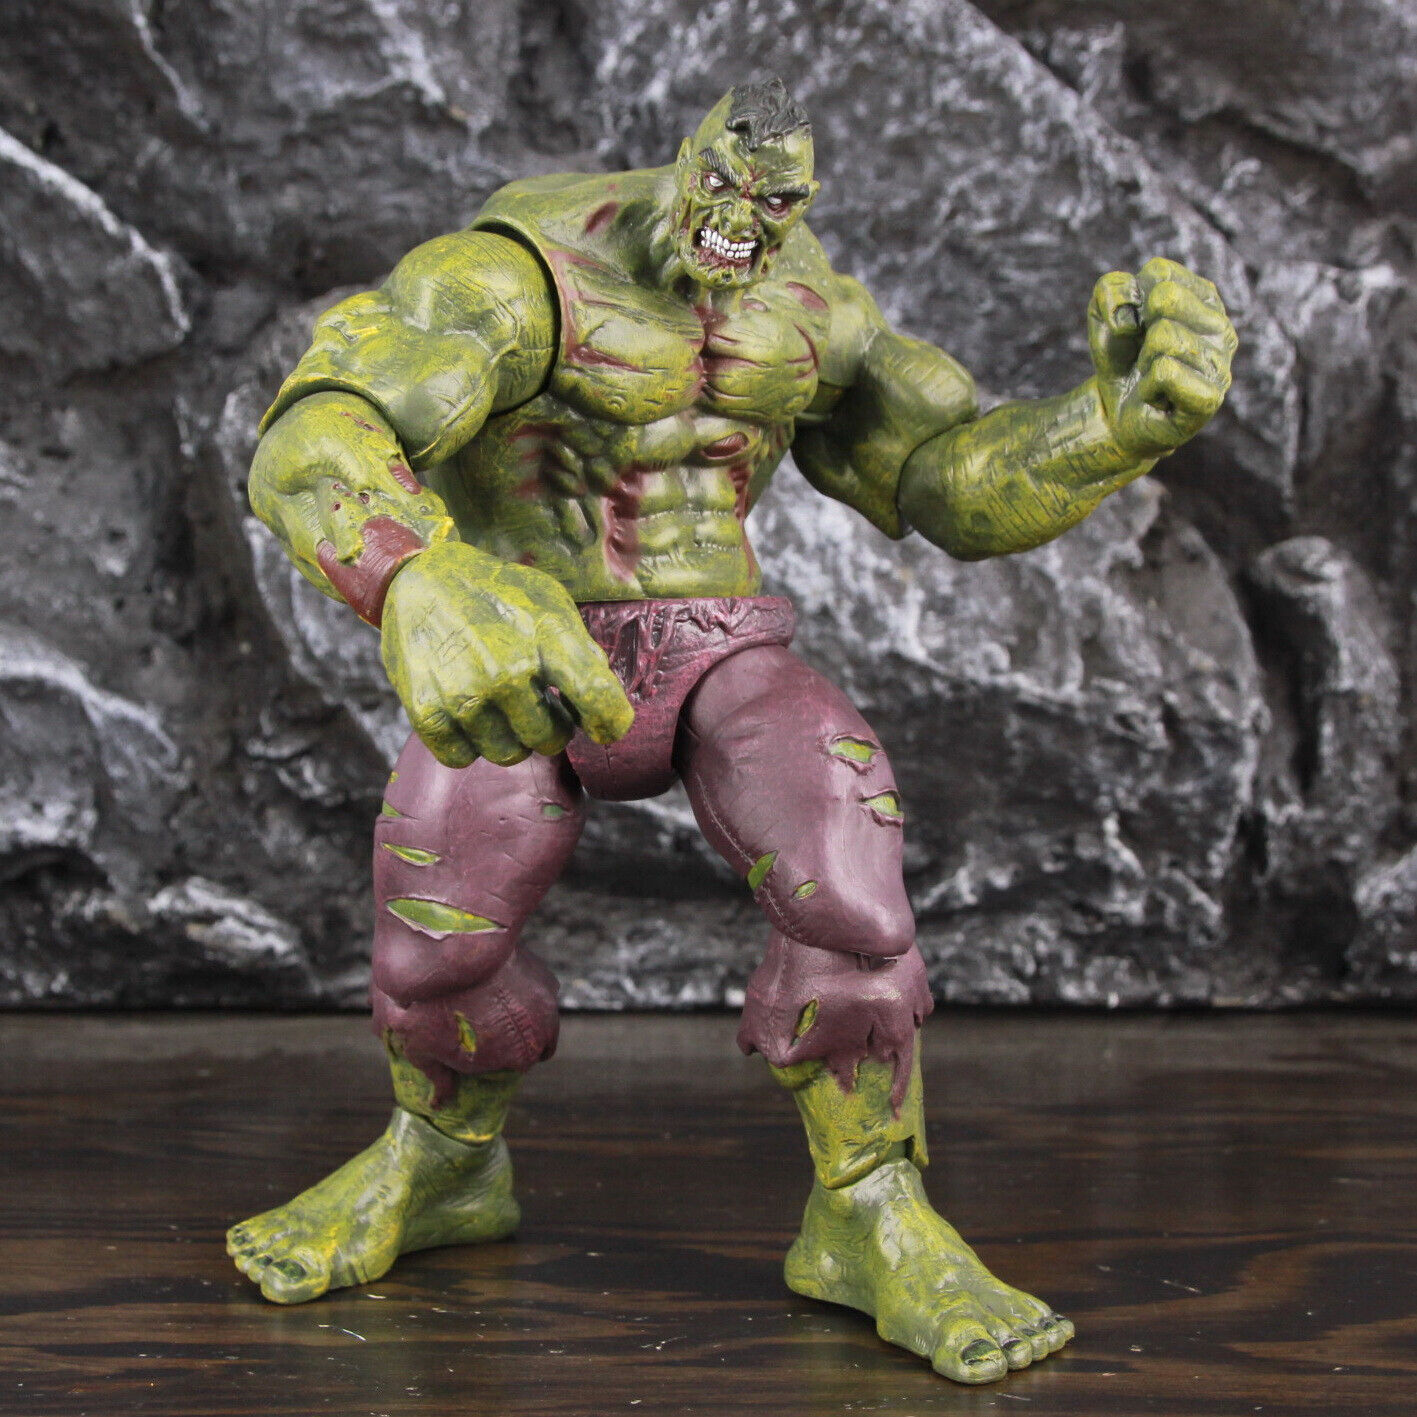 Rare Zombie Hulk Action Figure Toy Collectible PVC figurine Model Toys 8in